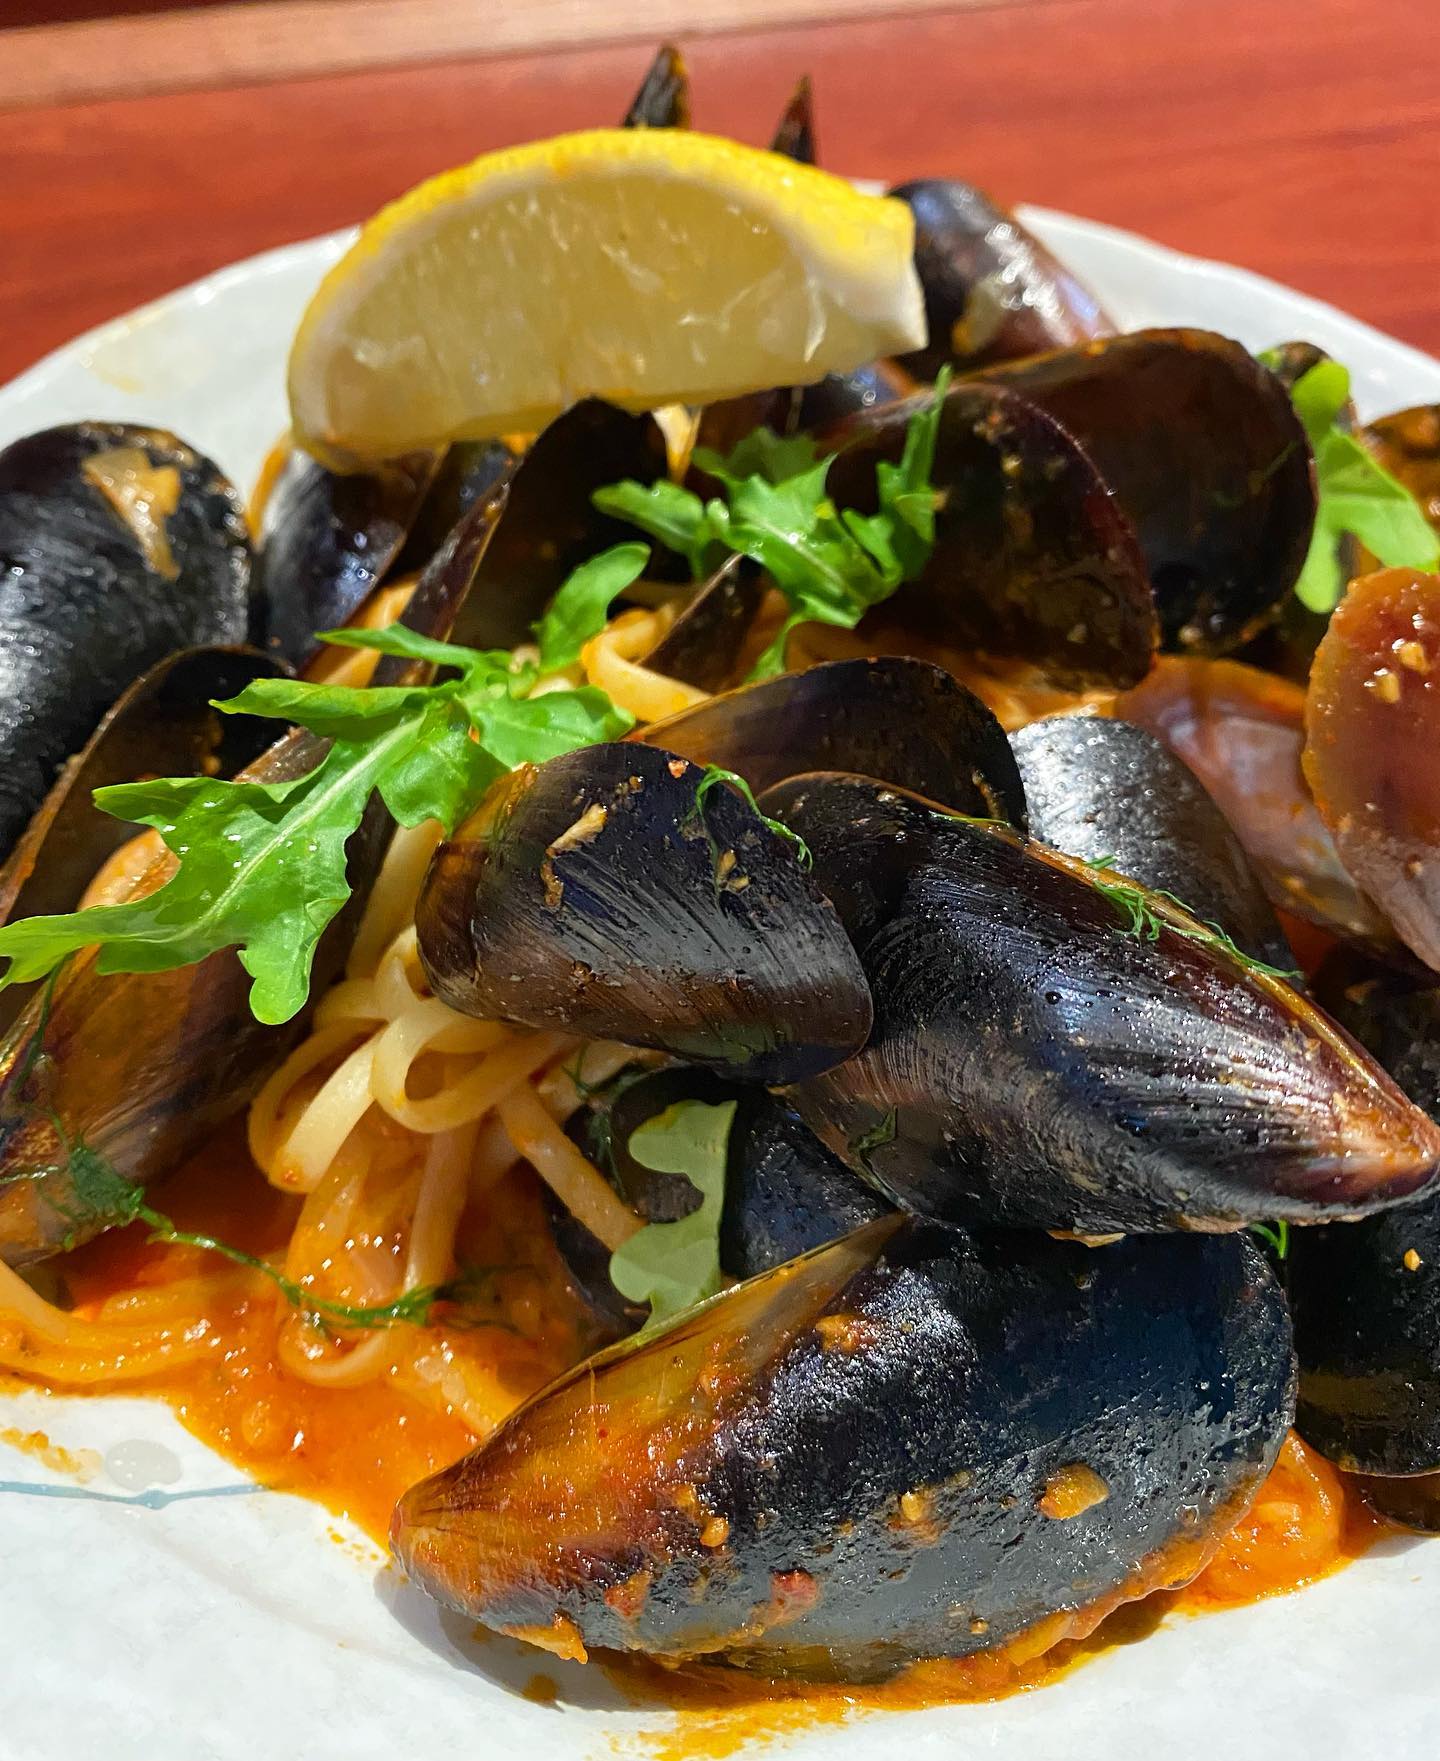 New special!
Mussels sake arrabbiata. (Spicy tomato sauce pasta) Our chef has many years of experience as an Italian style chef in Tokyo. No wonder, come and try it !!